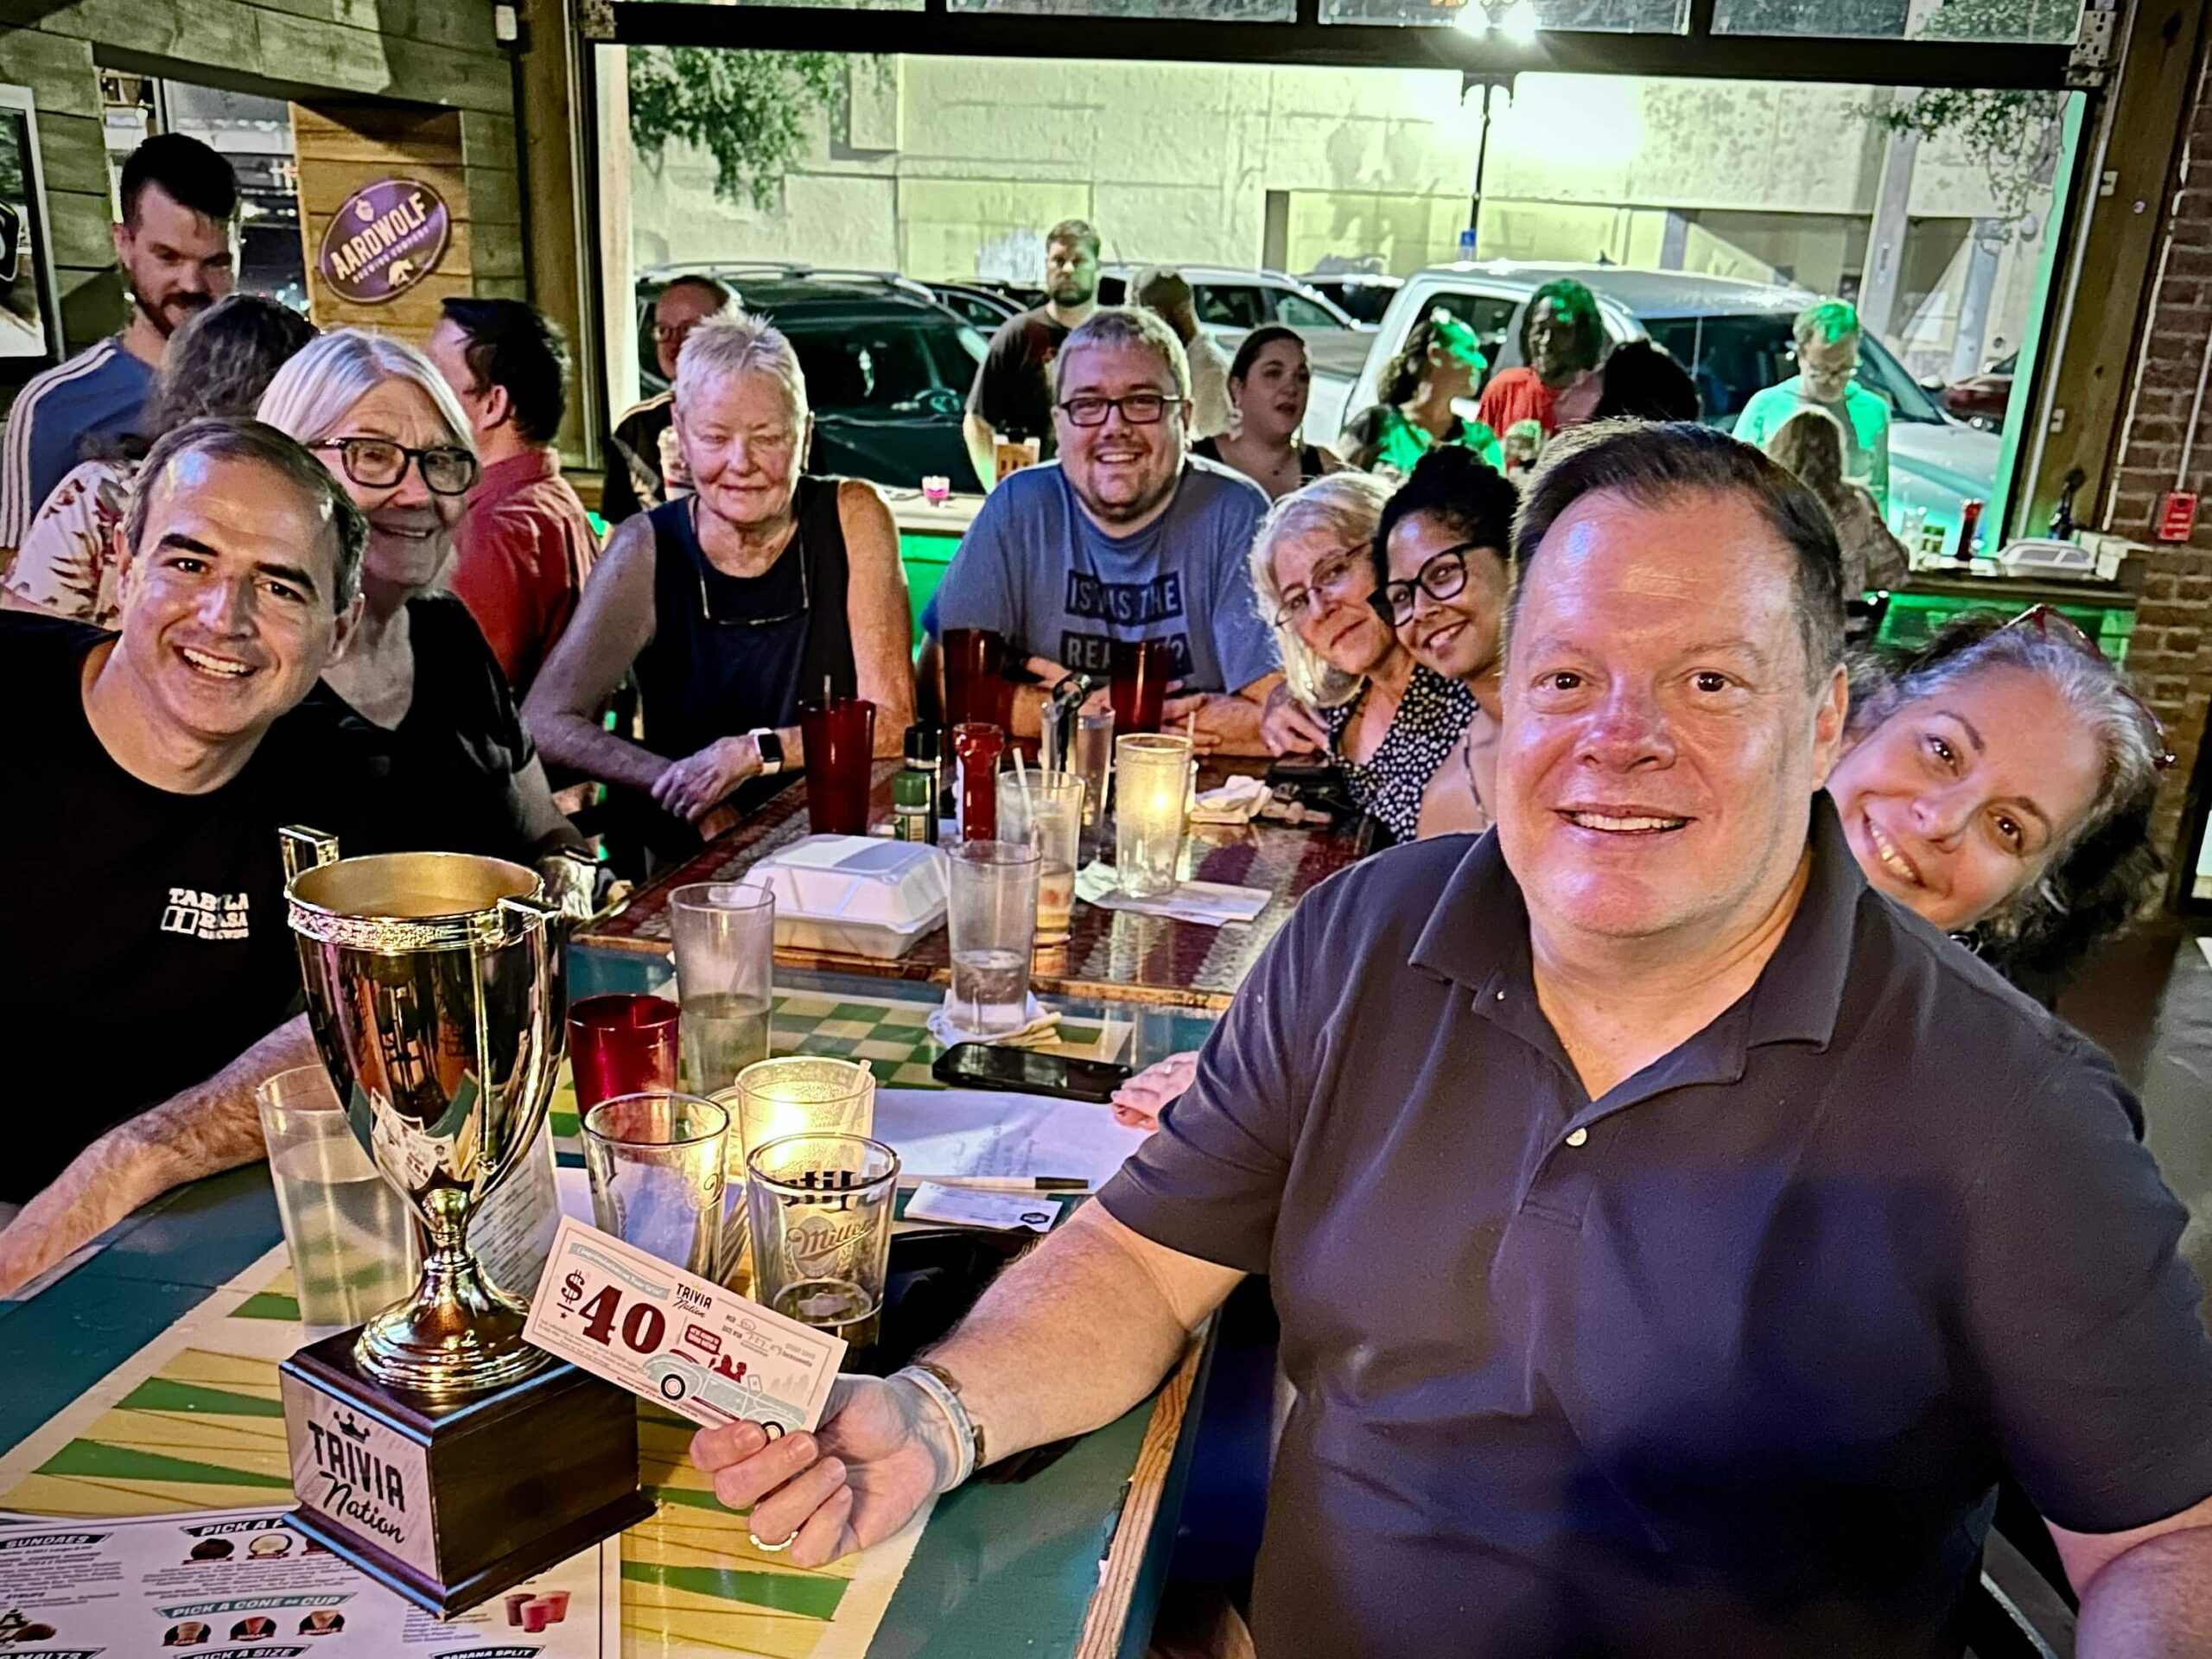 The Stout Snug Jacksonville FL 32205 trivia night: group of adults around a table smiling with an open window overlooking the street behind them and a Trivia Nation trophy on the table